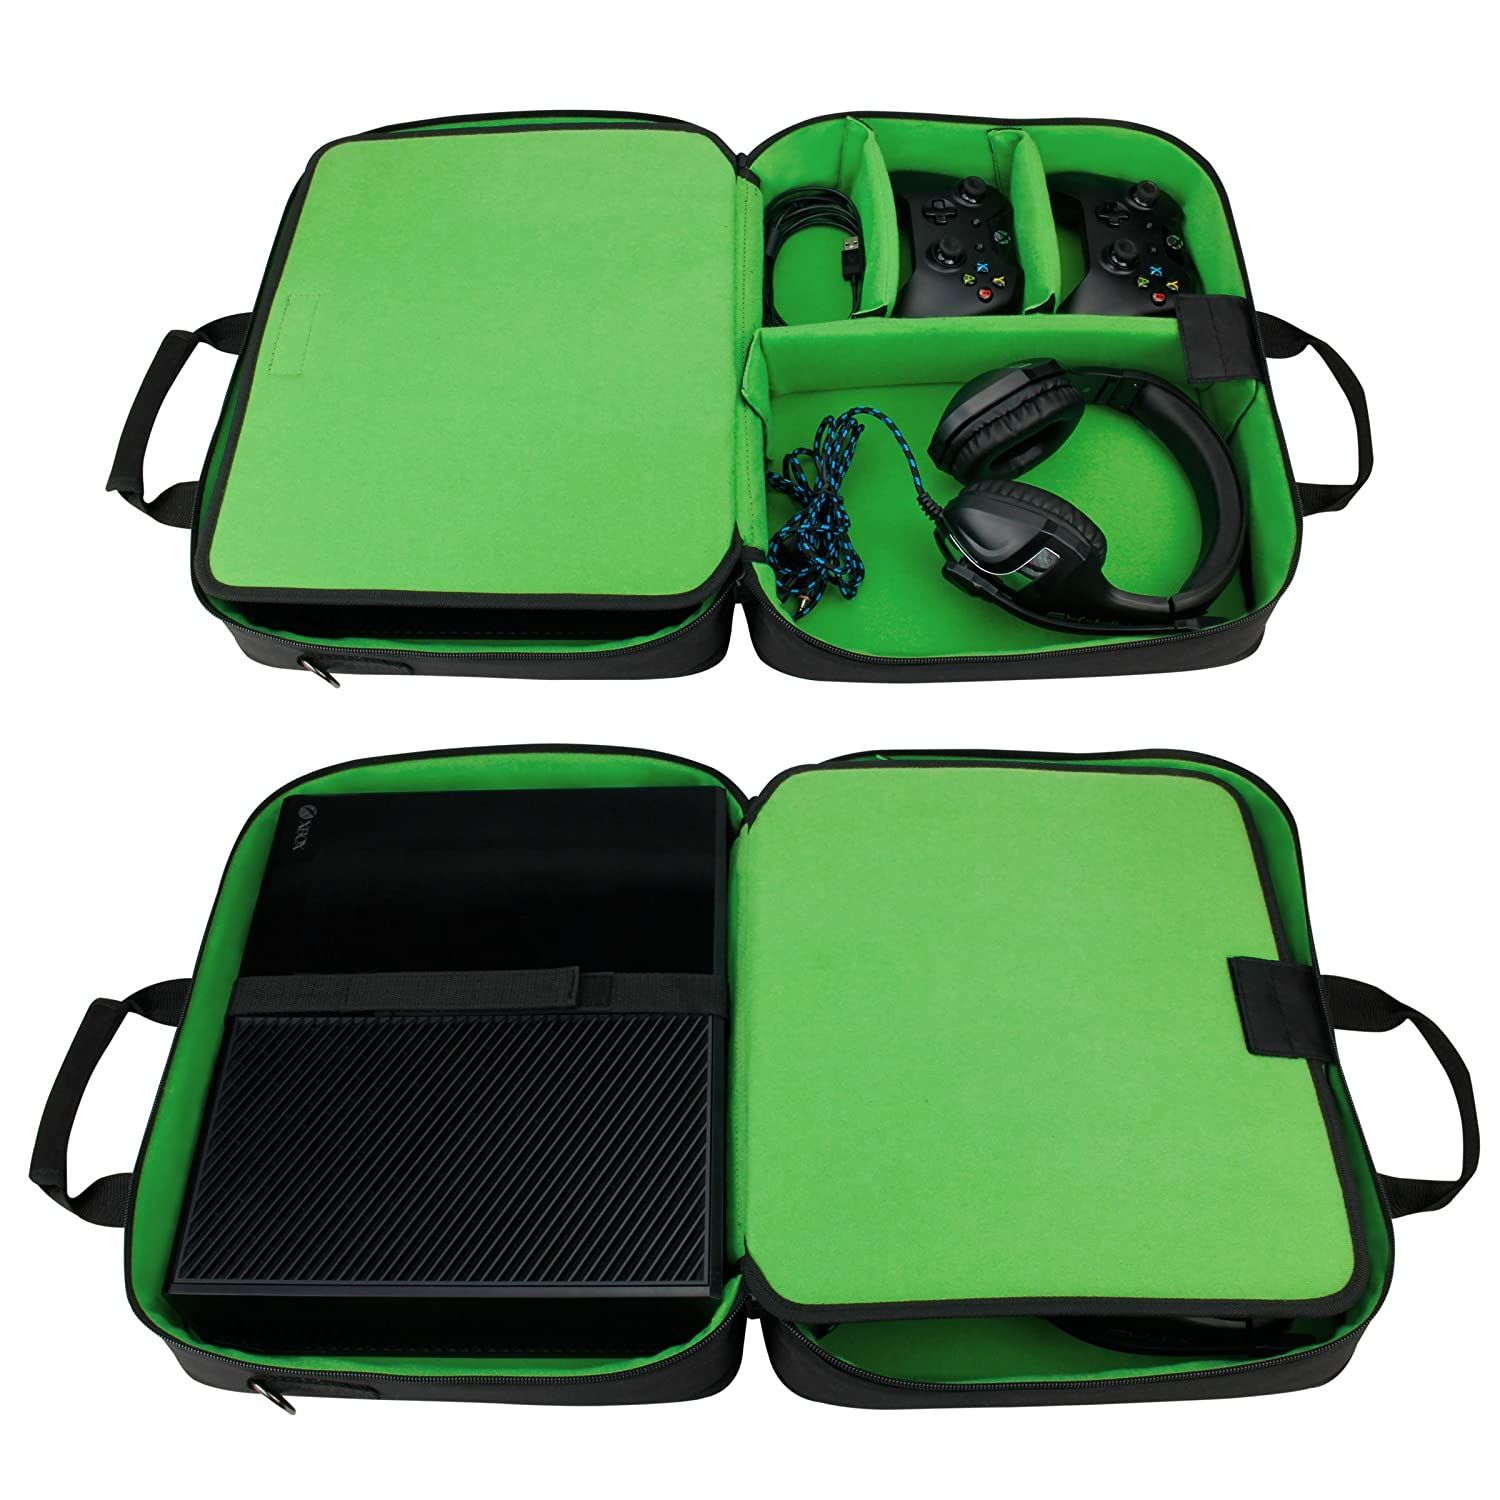 USA GEAR Console Carrying Case 